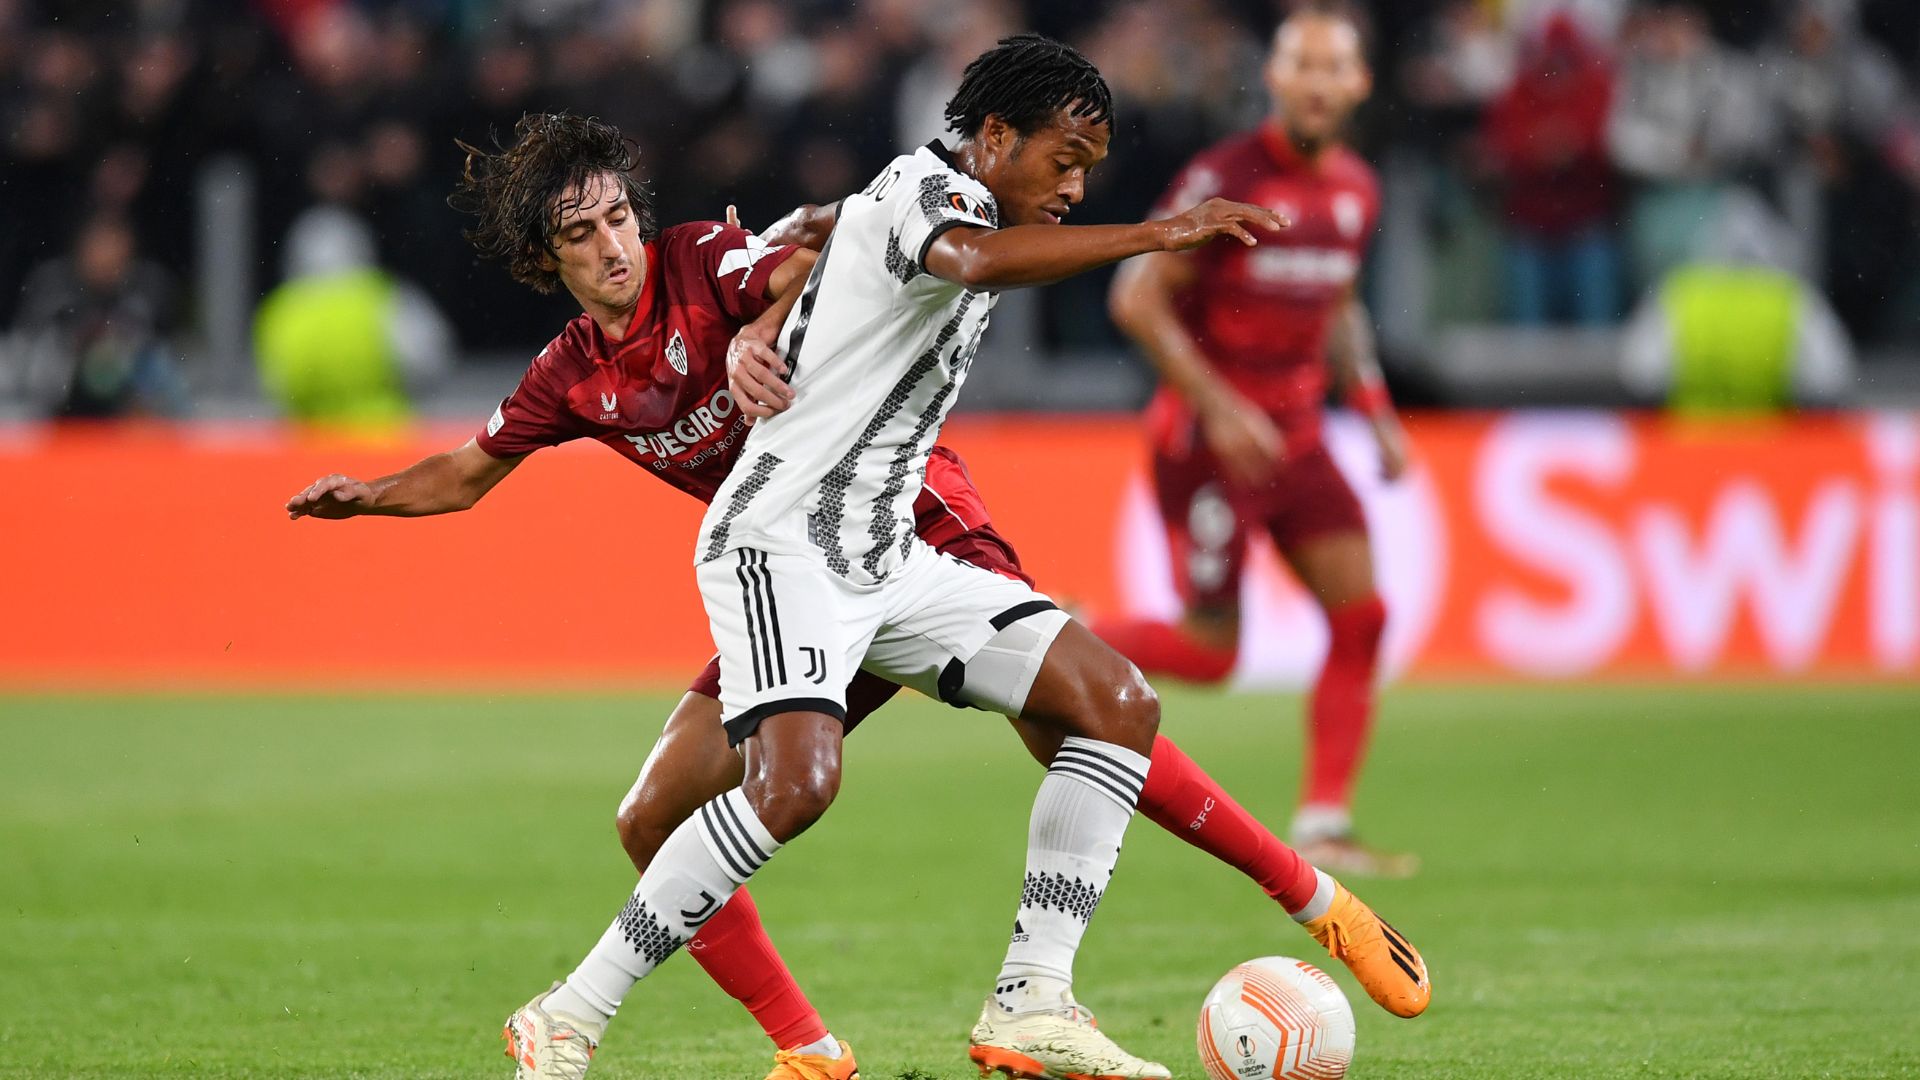 Tough game between Juventus and Sevilla (Credit: Getty Images)